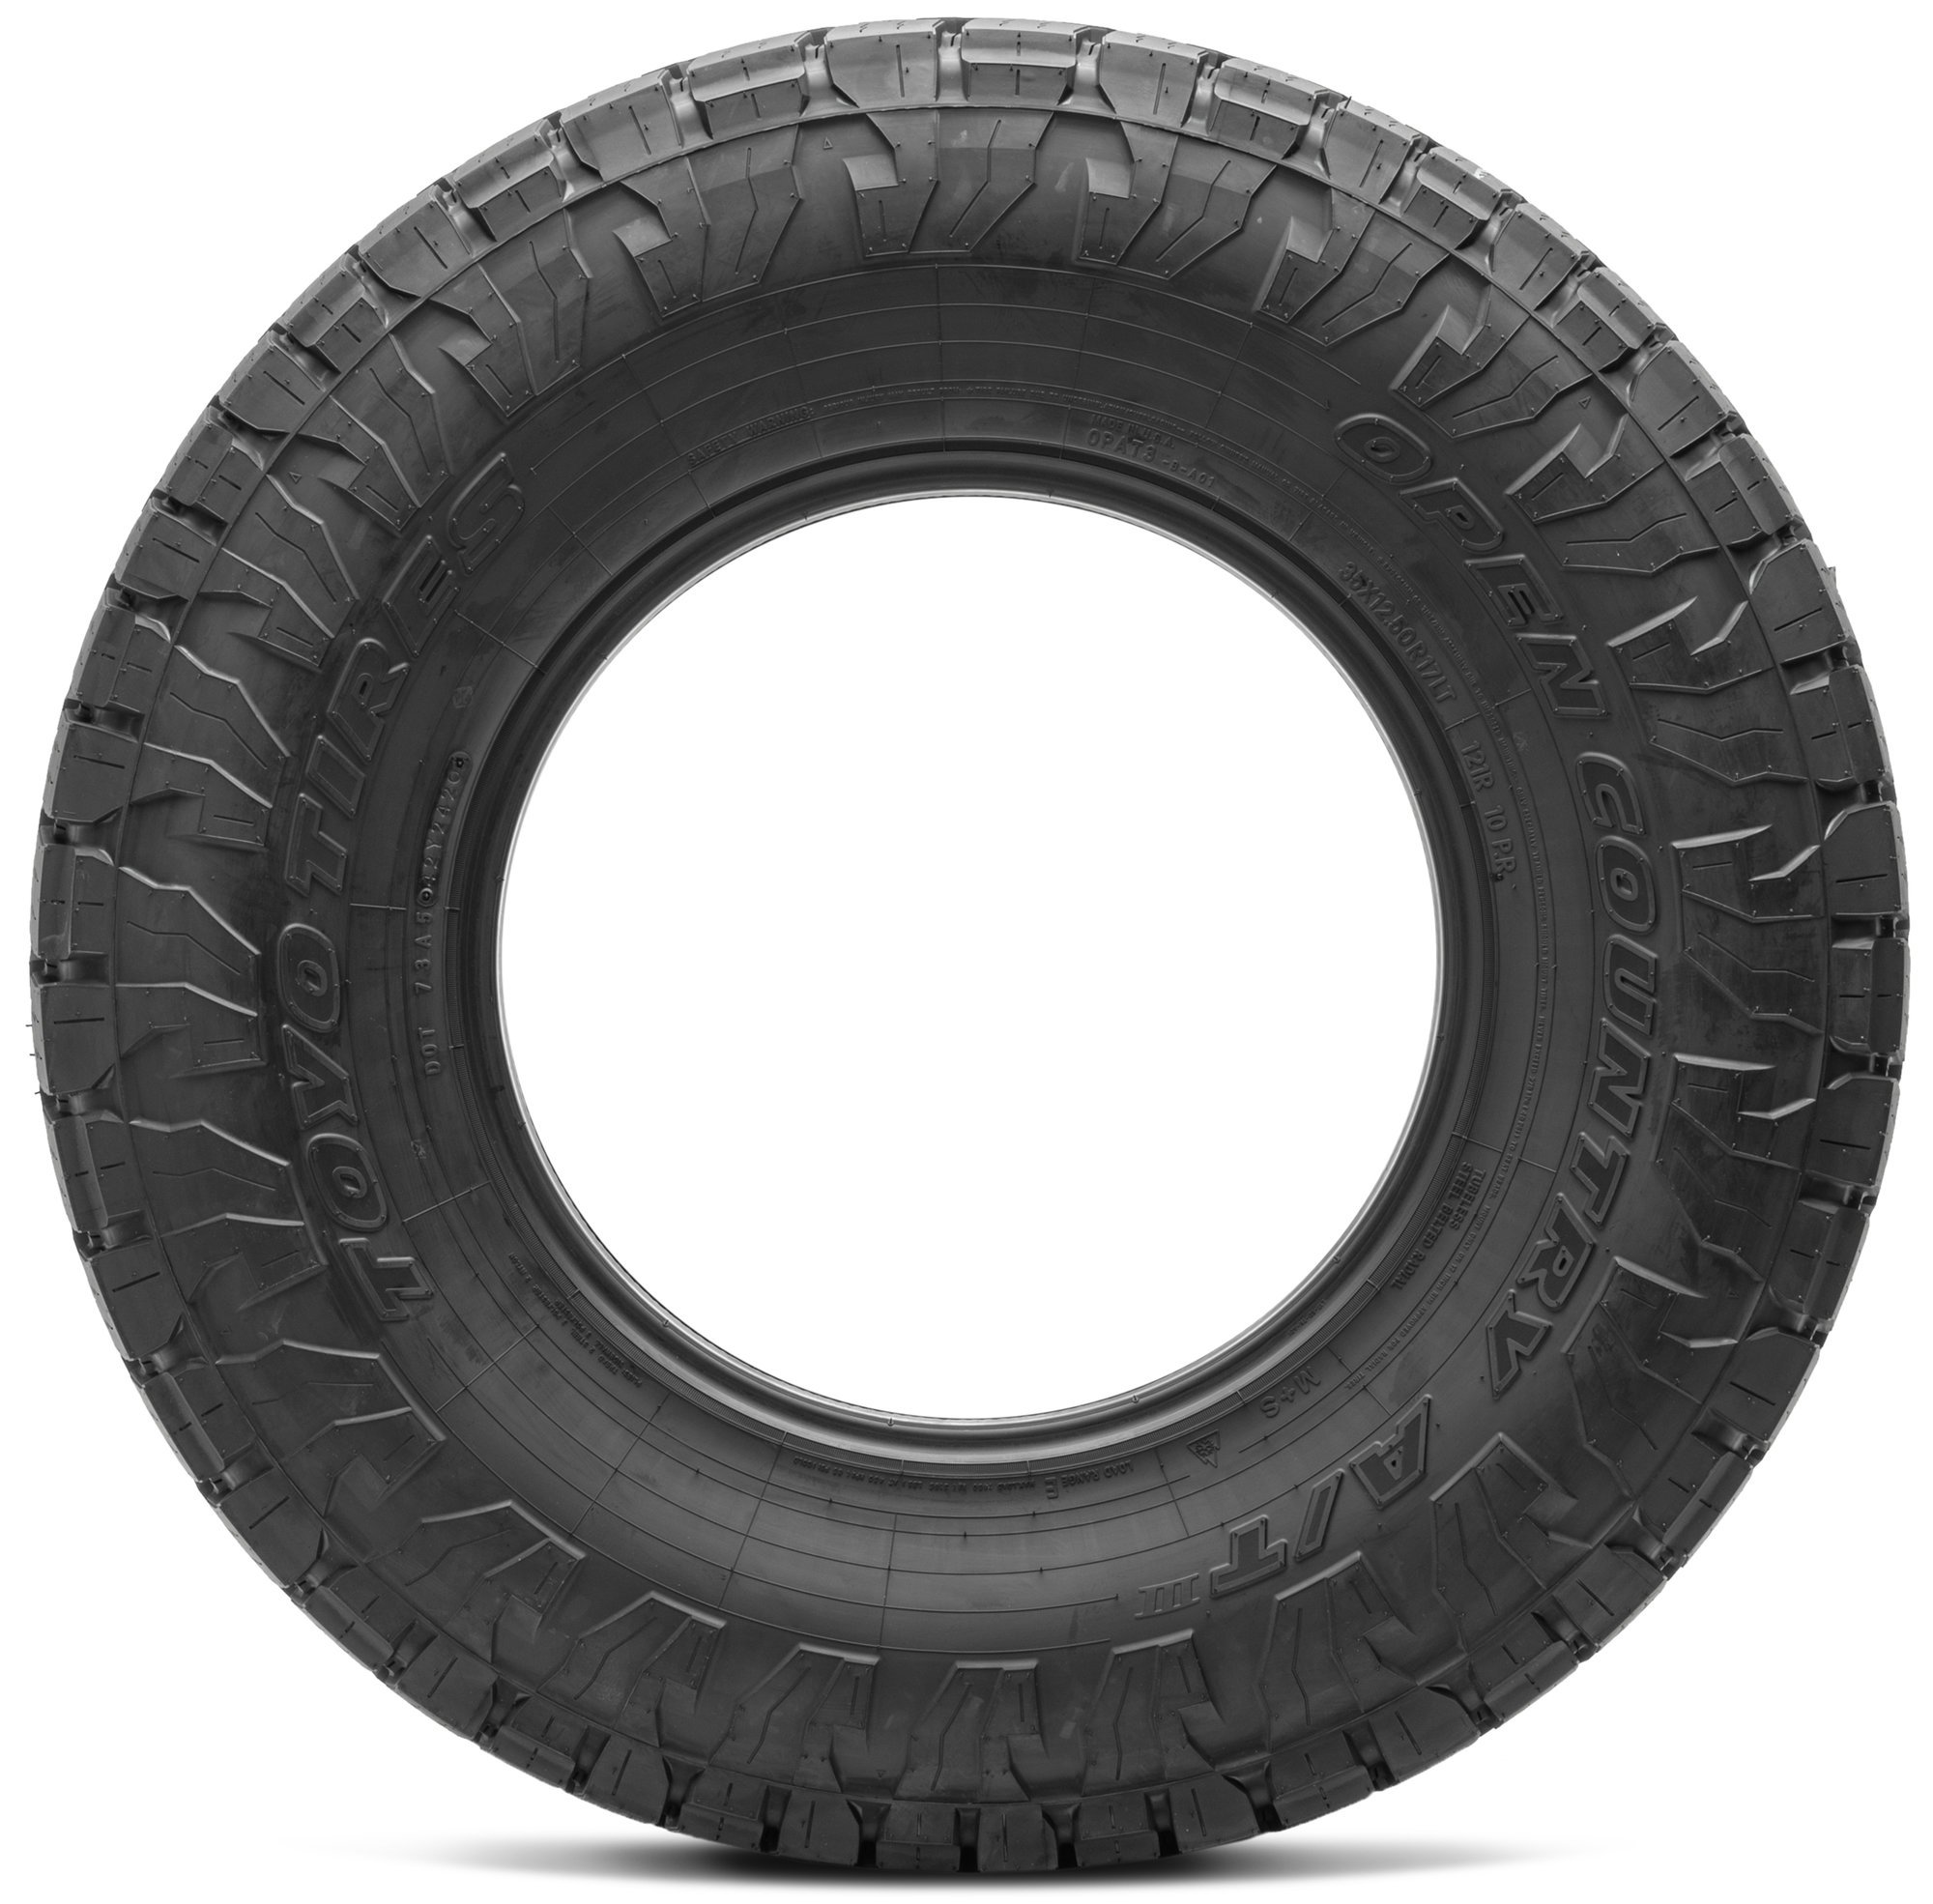 Toyo Tires Open Country A/T III Tire